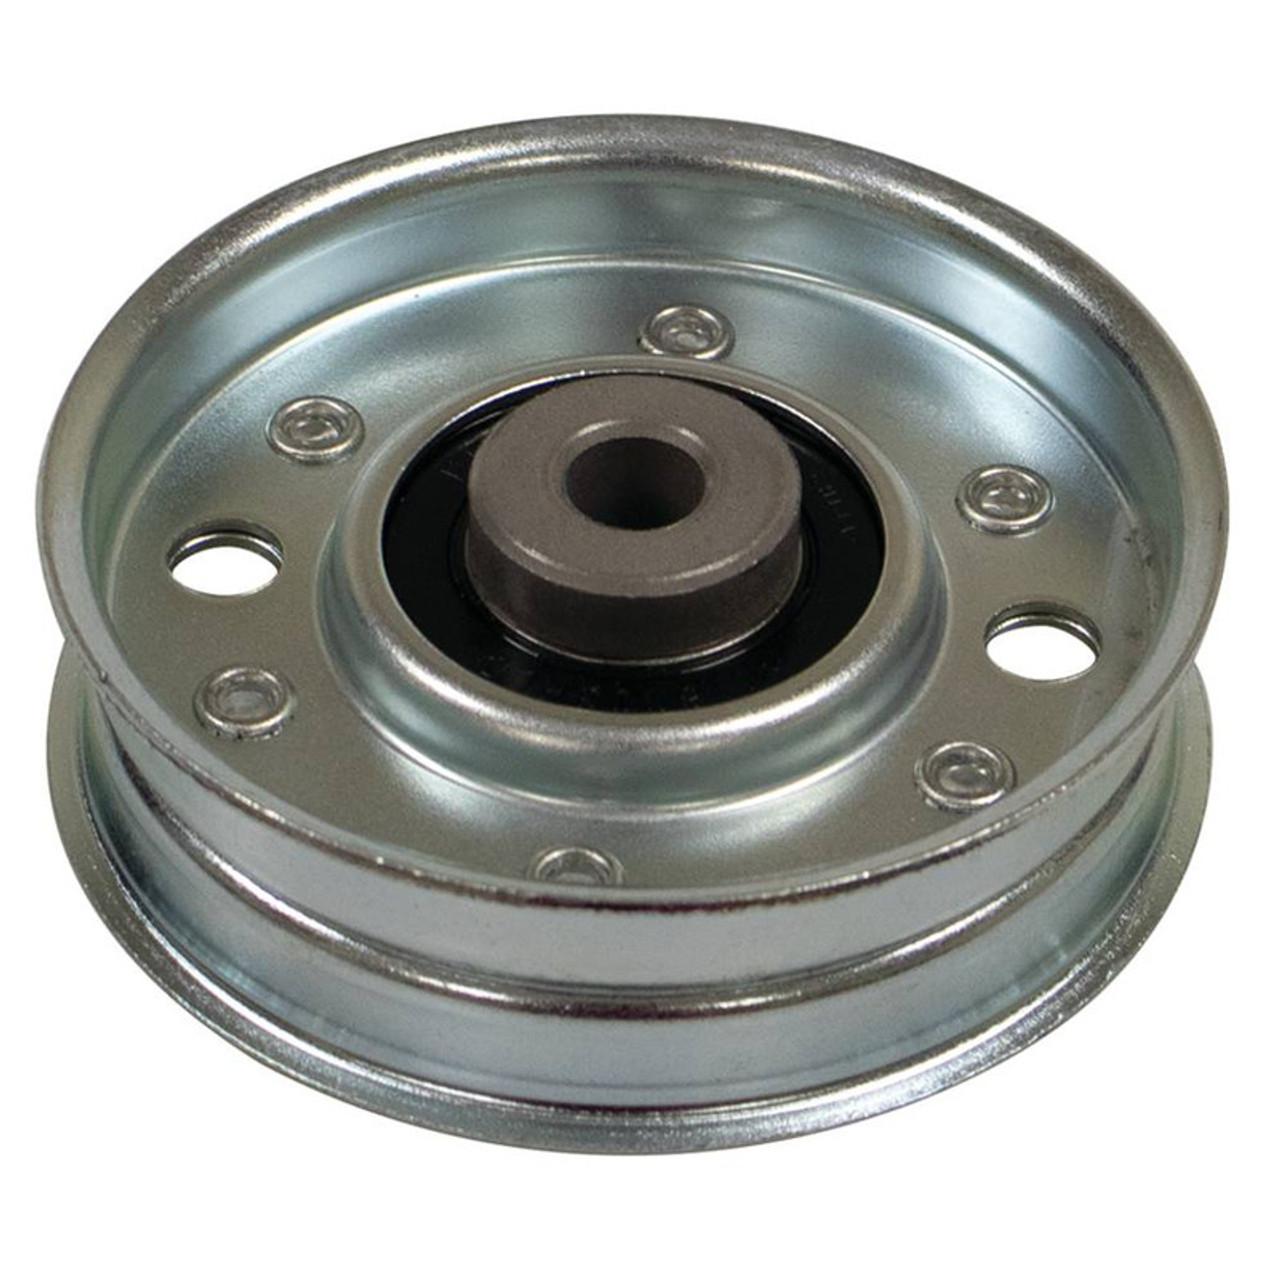 TORO 51-3660 Pulley-Idler
Where Used: Part Number 51-3660
Model Name Diagram
30108, Mid-Size Proline Gear Traction Unit, 8 hp, 1984 (SN 4000001-
4999999)
36" CUTTING DECK MODEL NO. 30136
30111, Mid-Size Proline Gear Traction Unit, 11 hp, 1984 (SN 4000001-
4999999)
36" CUTTING DECK MODEL NO. 30136
30111, Mid-Size Proline Gear Traction Unit, 11 hp, 1985 (SN 5000001-
5999999)
36" CUTTING DECK MODEL NO. 30136
30111, Mid-Size Proline Gear Traction Unit, 11 hp, 1986 (SN 6000001-
6999999)
36" CUTTING DECK MODEL NO. 30136
30112, Mid-Size Proline Gear Traction Unit, 12.5 hp, 1986 (SN 6000001-
6999999)
36 INCH CUTTING DECK MODEL NO. 30136
30113, Mid-Size Proline Gear Traction Unit, 8 hp, 1985 (SN 5000001-
5999999)
36" CUTTING DECK MODEL NO. 30136
30113, Mid-Size Proline Gear Traction Unit, 8 hp, 1986 (SN 6000001-
6999999)
36" CUTTING DECK MODEL NO. 30136
30116, Mid-Size Proline Gear Traction Unit, 16 hp, 1986 (SN 6000001-
6999999)
36" CUTTING DECK MODEL NO. 30136
30125, 36" Soft Bag (5 bu.) for Floating Mid-Size Mowers, 1985 (SN
5000001-5999999)
36" CUTTING DECK MODEL NO. 30136
30125, 36" Soft Bag (5 bu.) for Floating Mid-Size Mowers, 1986 (SN
6000001-6999999)
36" CUTTING DECK MODEL NO. 30136
30136, 36" Side Discharge Mower, 1984 (SN 4000001-4999999) 36" CUTTING DECK MODEL NO. 30136
30136, 36" Side Discharge Mower, 1985 (SN 5000001-5999999) 36" CUTTING DECK MODEL NO. 30136
30136, 36" Side Discharge Mower, 1986 (SN 6000001-6000797) 36" CUTTING DECK MODEL NO. 30136
30136, 36" Side Discharge Mower, 1987 (SN 7000001-7999999) CUTTING UNIT ASSEMBLY
30136, 36" Side Discharge Mower, 1988 (SN 8000001-8999999) CUTTING UNIT ASSEMBLY
30136, 36" Side Discharge Mower, 1989 (SN 9000001-9999999) CUTTING UNIT ASSEMBLY
30136, 36" Side Discharge Mower, 1990 (SN 0000001-0999999) CUTTING UNIT ASSEMBLY
30136, 36" Side Discharge Mower, 1991 (SN 1000001-1999999) CUTTING UNIT ASSEMBLY
30136, 36" Side Discharge Mower, 1992 (SN 2000001-2999999) CUTTING UNIT ASSEMBLY
30136, 36" Side Discharge Mower, 1993 (SN 3900001-3999999) CUTTING UNIT ASSEMBLY
30136, 36" Side Discharge Mower, 1994 (SN 4900001-4901036) CUTTING UNIT ASSEMBLY
30136, 36" Side Discharge Mower, 1994 (SN 4901037-4999999) CUTTING UNIT ASSEMBLY
30144, 44" Side Discharge Mower, 1985 (SN 5000001-5999999) 36" CUTTING DECK MODEL NO. 30136
30152, 52" Side Discharge Mower, 1984 (SN 400001-499999) 36" CUTTING DECK MODEL NO. 30136
30152, 52" Side Discharge Mower, 1985 (SN 5000001-5999999) 36" CUTTING DECK MODEL NO. 30136
